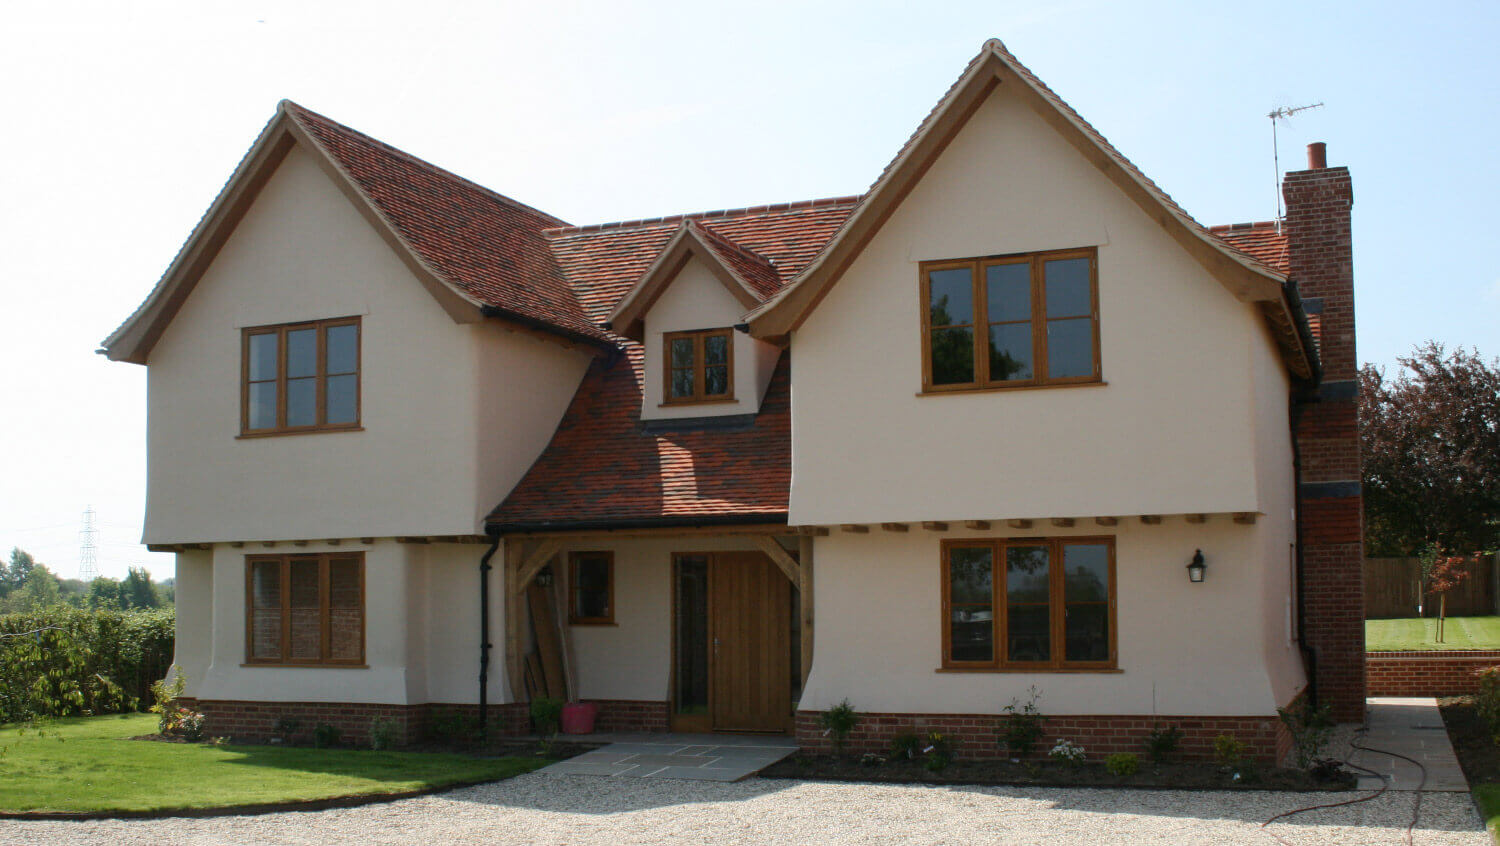 The front view of Burroughs, a five-bed house in our Arkesden road, Clavering development.